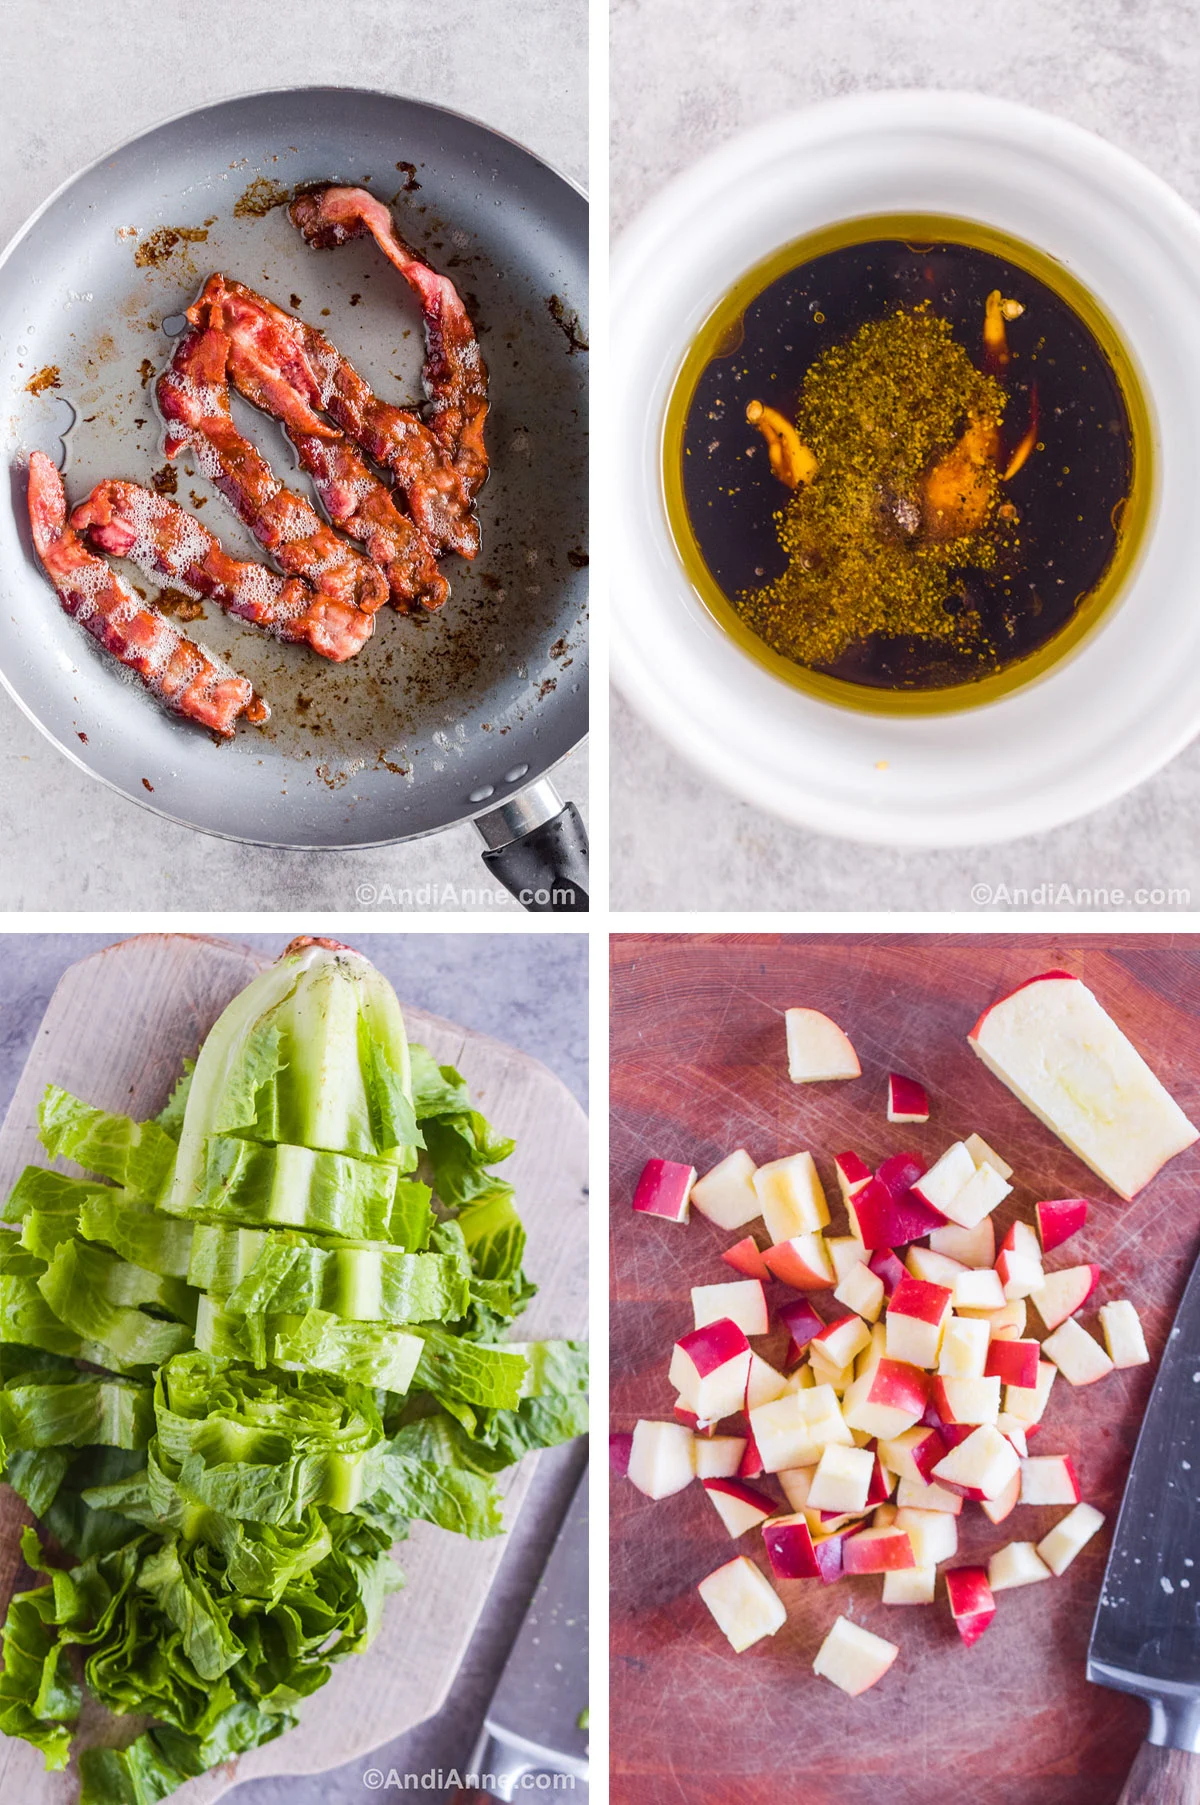 Four images grouped together showing steps to make the recipe. First is a frying pan with cooked bacon strips. Second is a bowl with various liquids and spices unmixed that are used to make the salad dressing. Third is chopped head of romaine lettuce on a cutting board. Fourth is chopped apple with a knife on a cutting board.